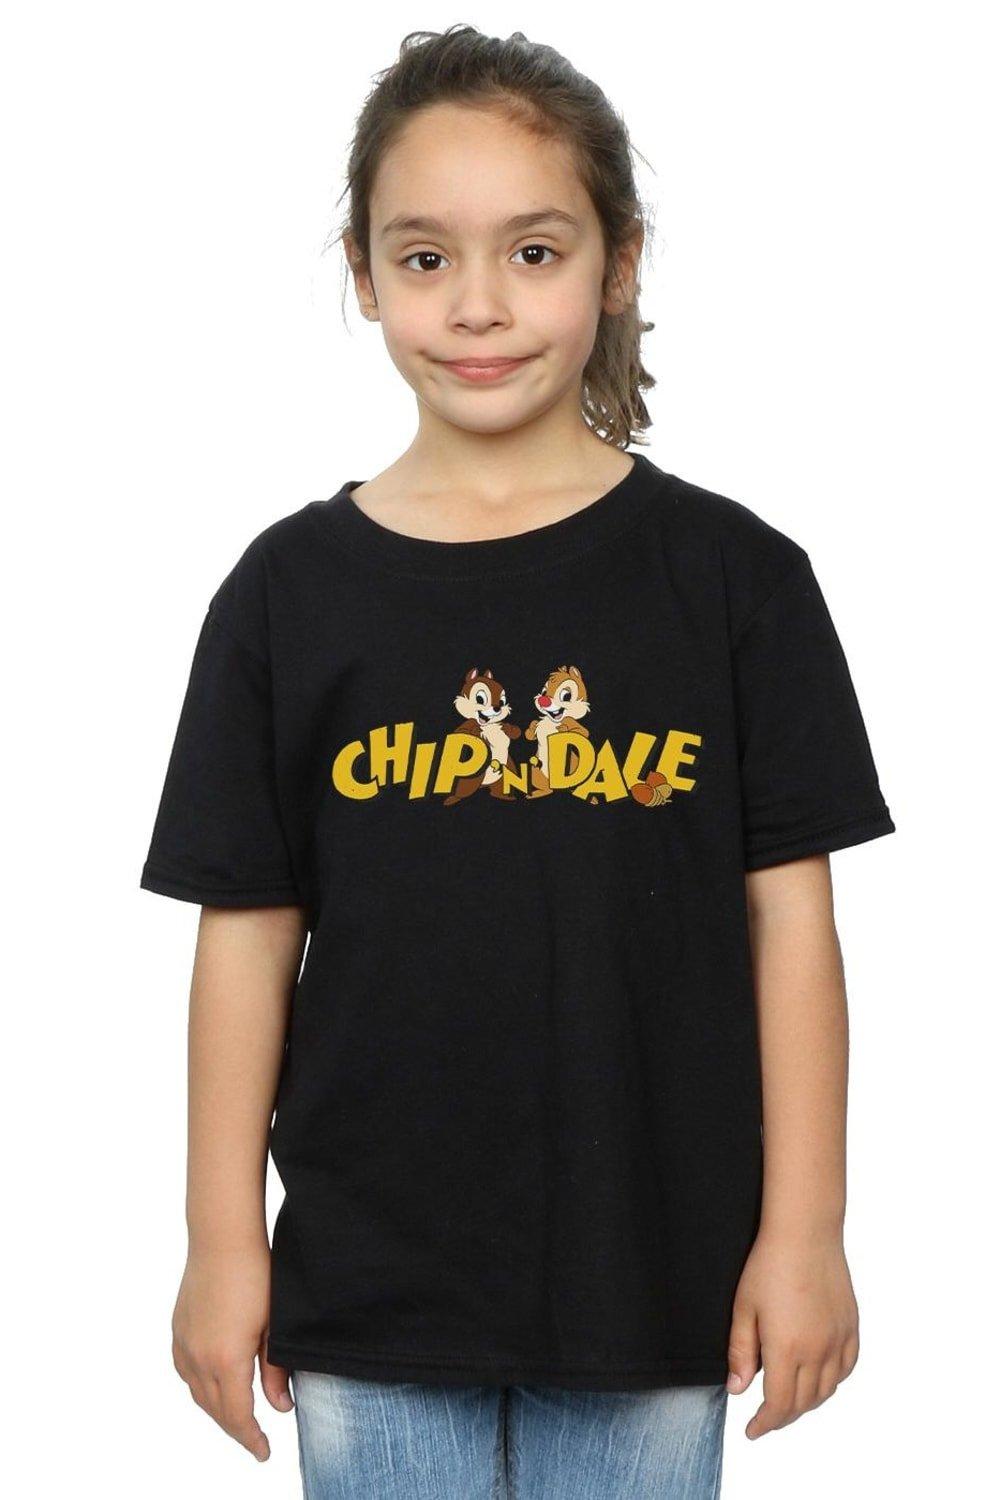 Chip And Dale Character Logo Cotton T-Shirt